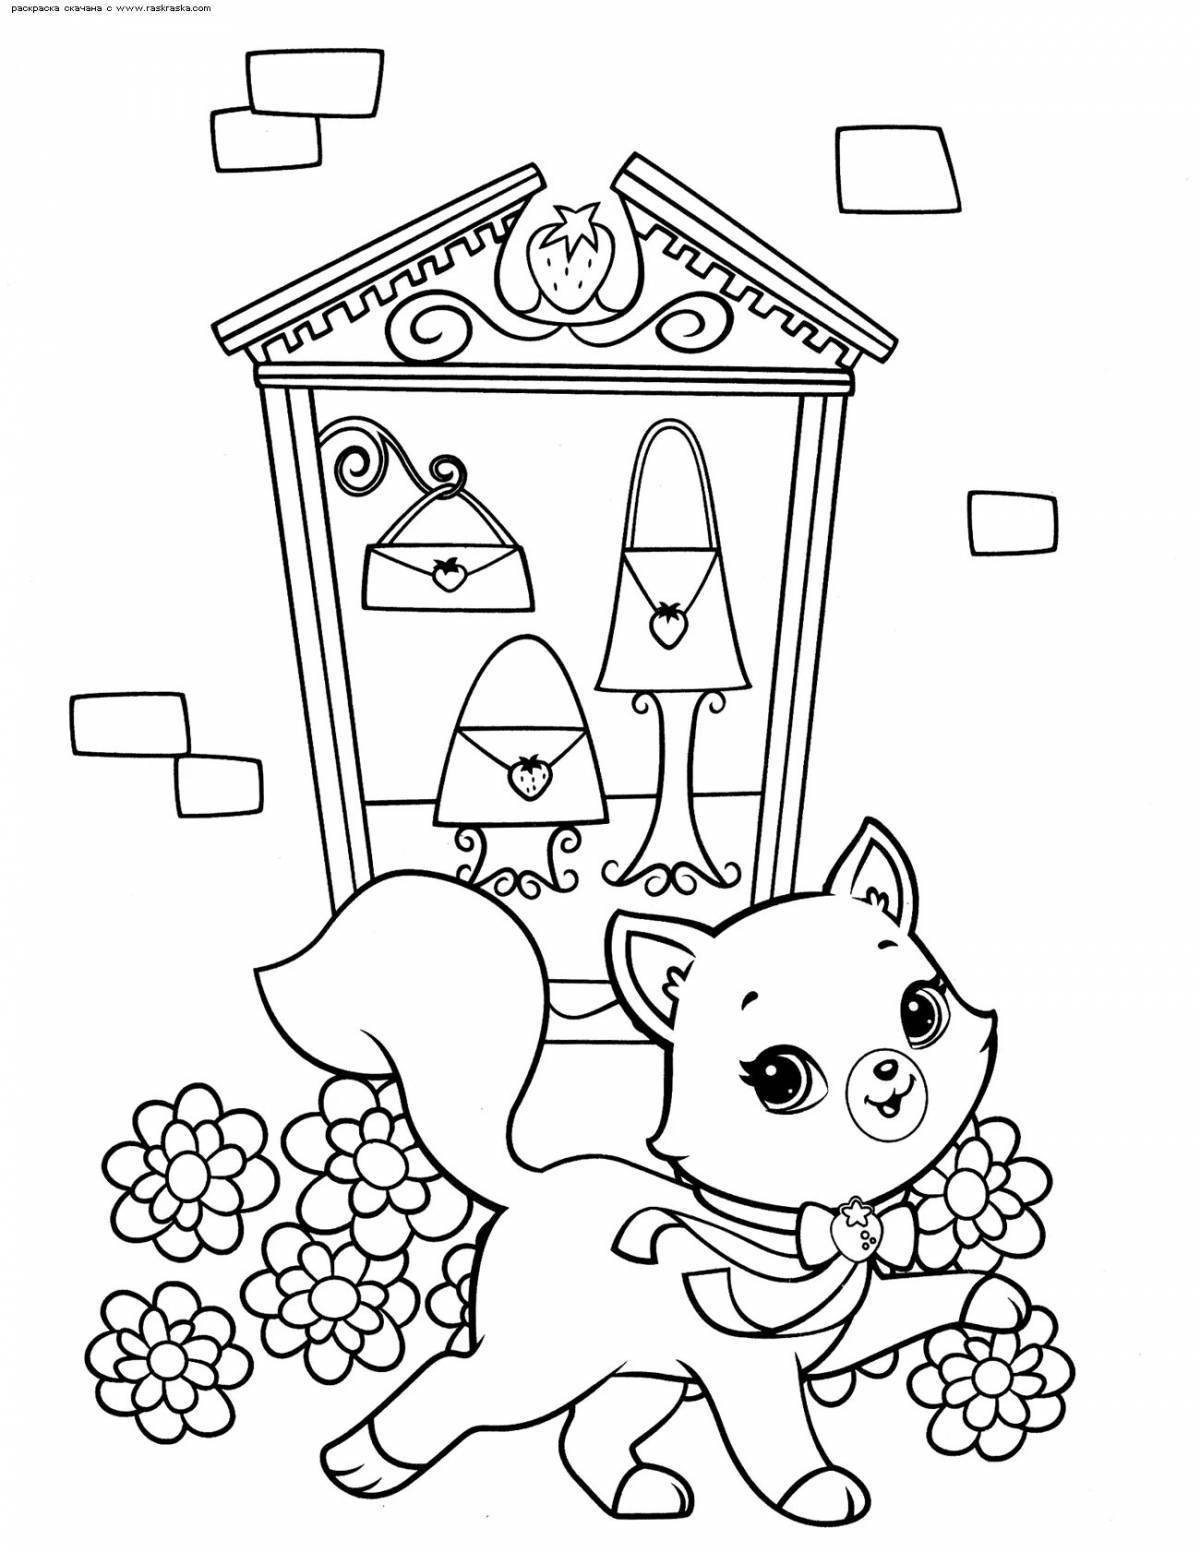 Coloring book shining dog house